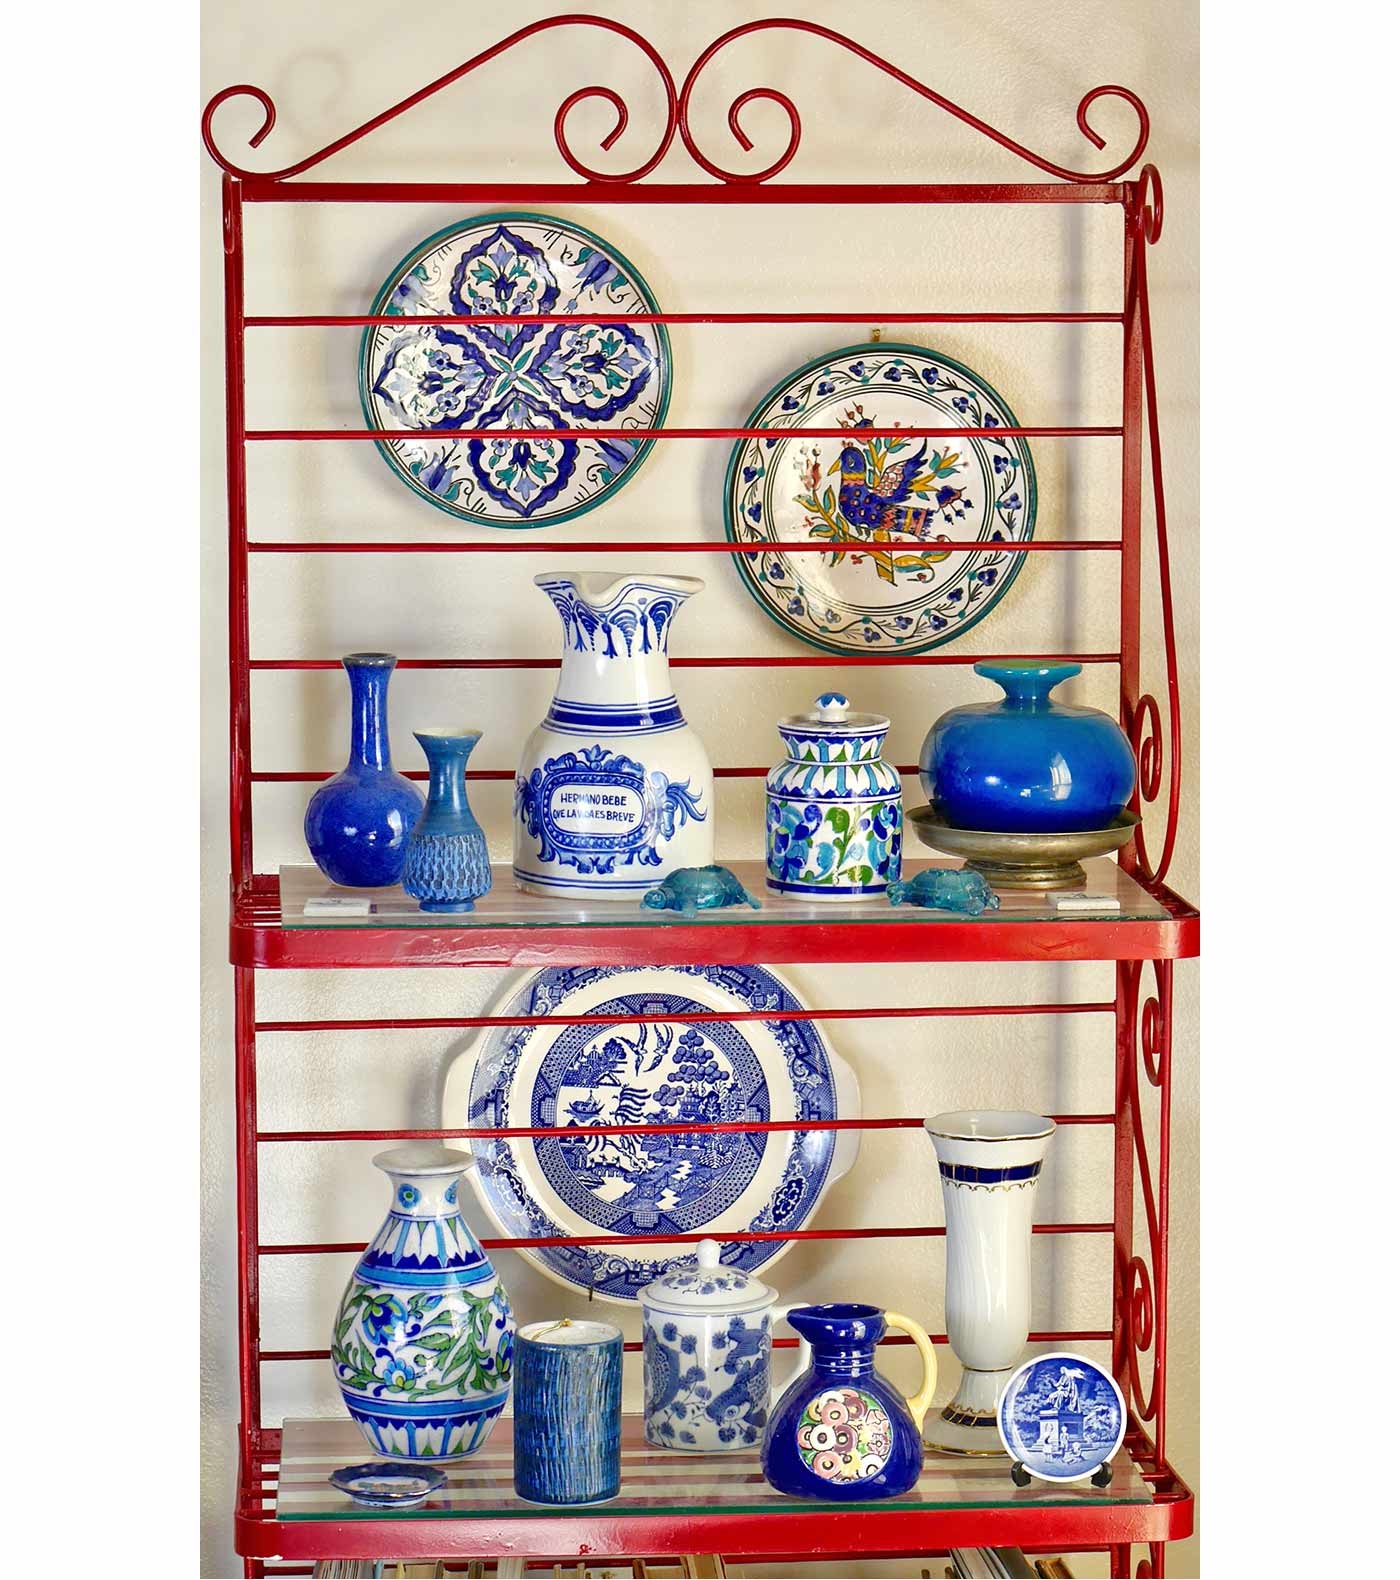 Anne's shelf with collection of blue and white (and a few extra colors) objects